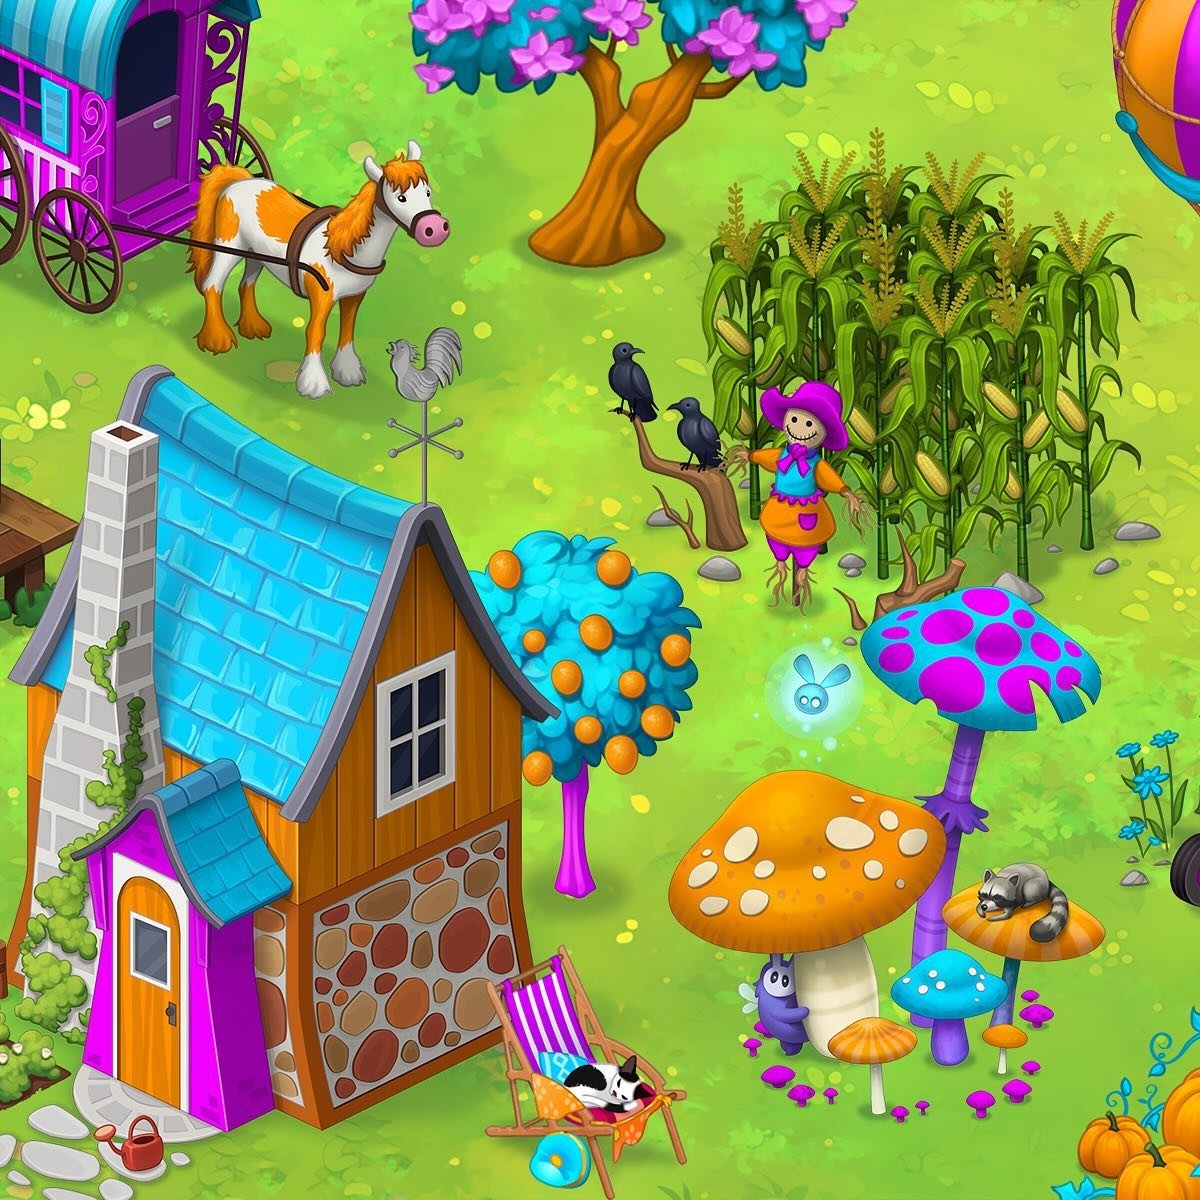 &lsquo;Colorville&rsquo; was unfortunately discontinued, but we got authorization to share the work we&rsquo;ve done 🎨
.
#isometricart #gameart #2dart #mobilegame #cozygame